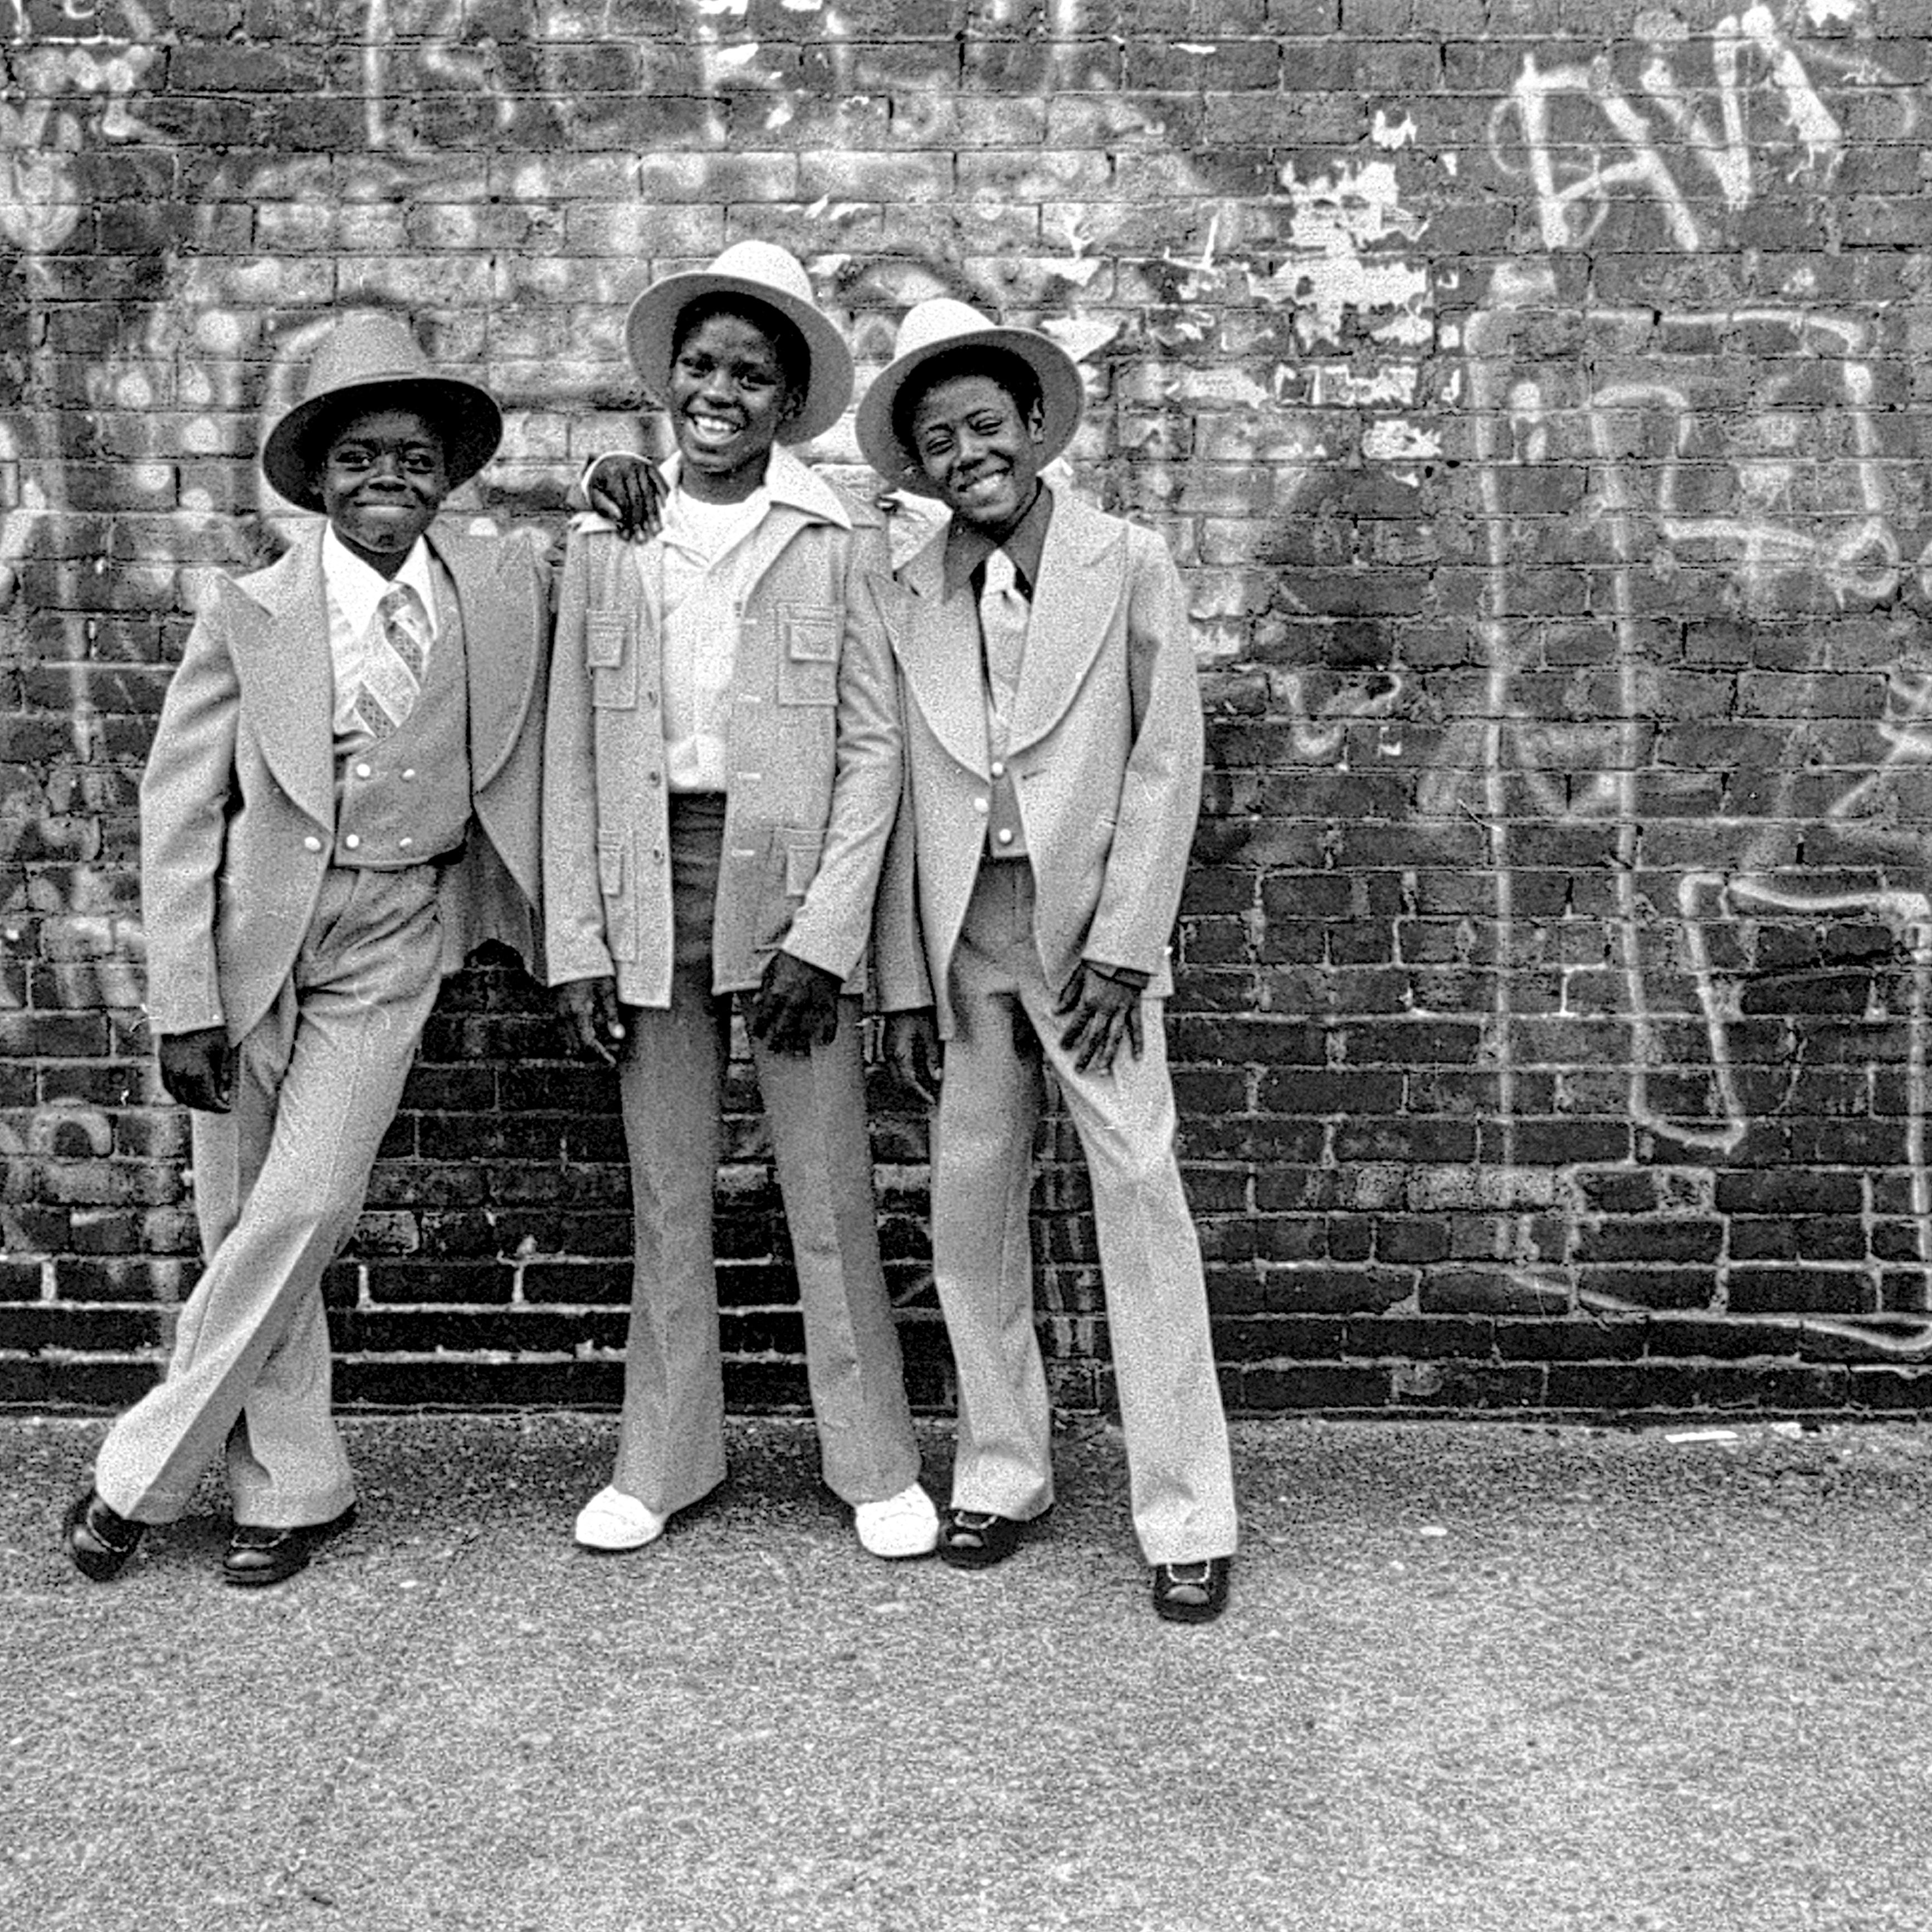 TBT: Epic Photos of Black Excellence From Harlem in the '70s
